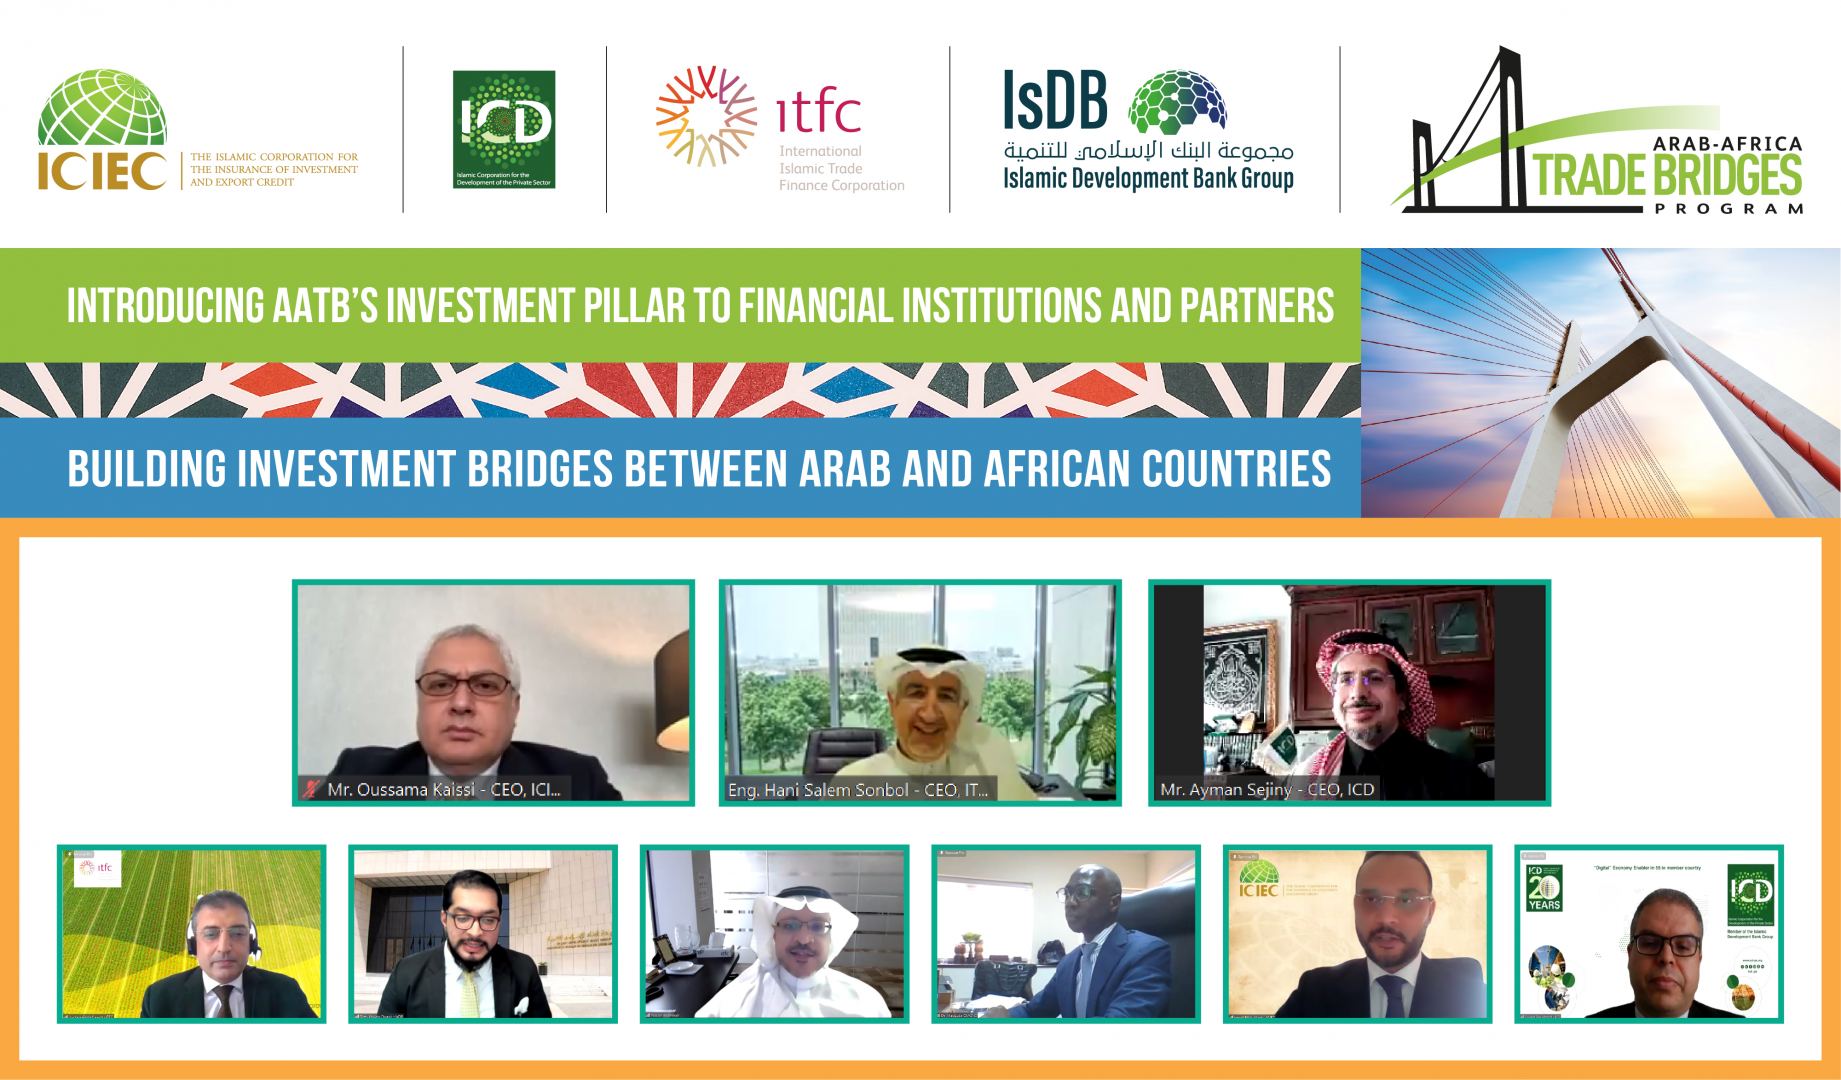 Over 1,000 Financial Stakeholders Participate in Arab-Africa Trade Bridges Program Investment Pillar Webinar Aimed at Growing Regional Trade Investment and Technology Transfer